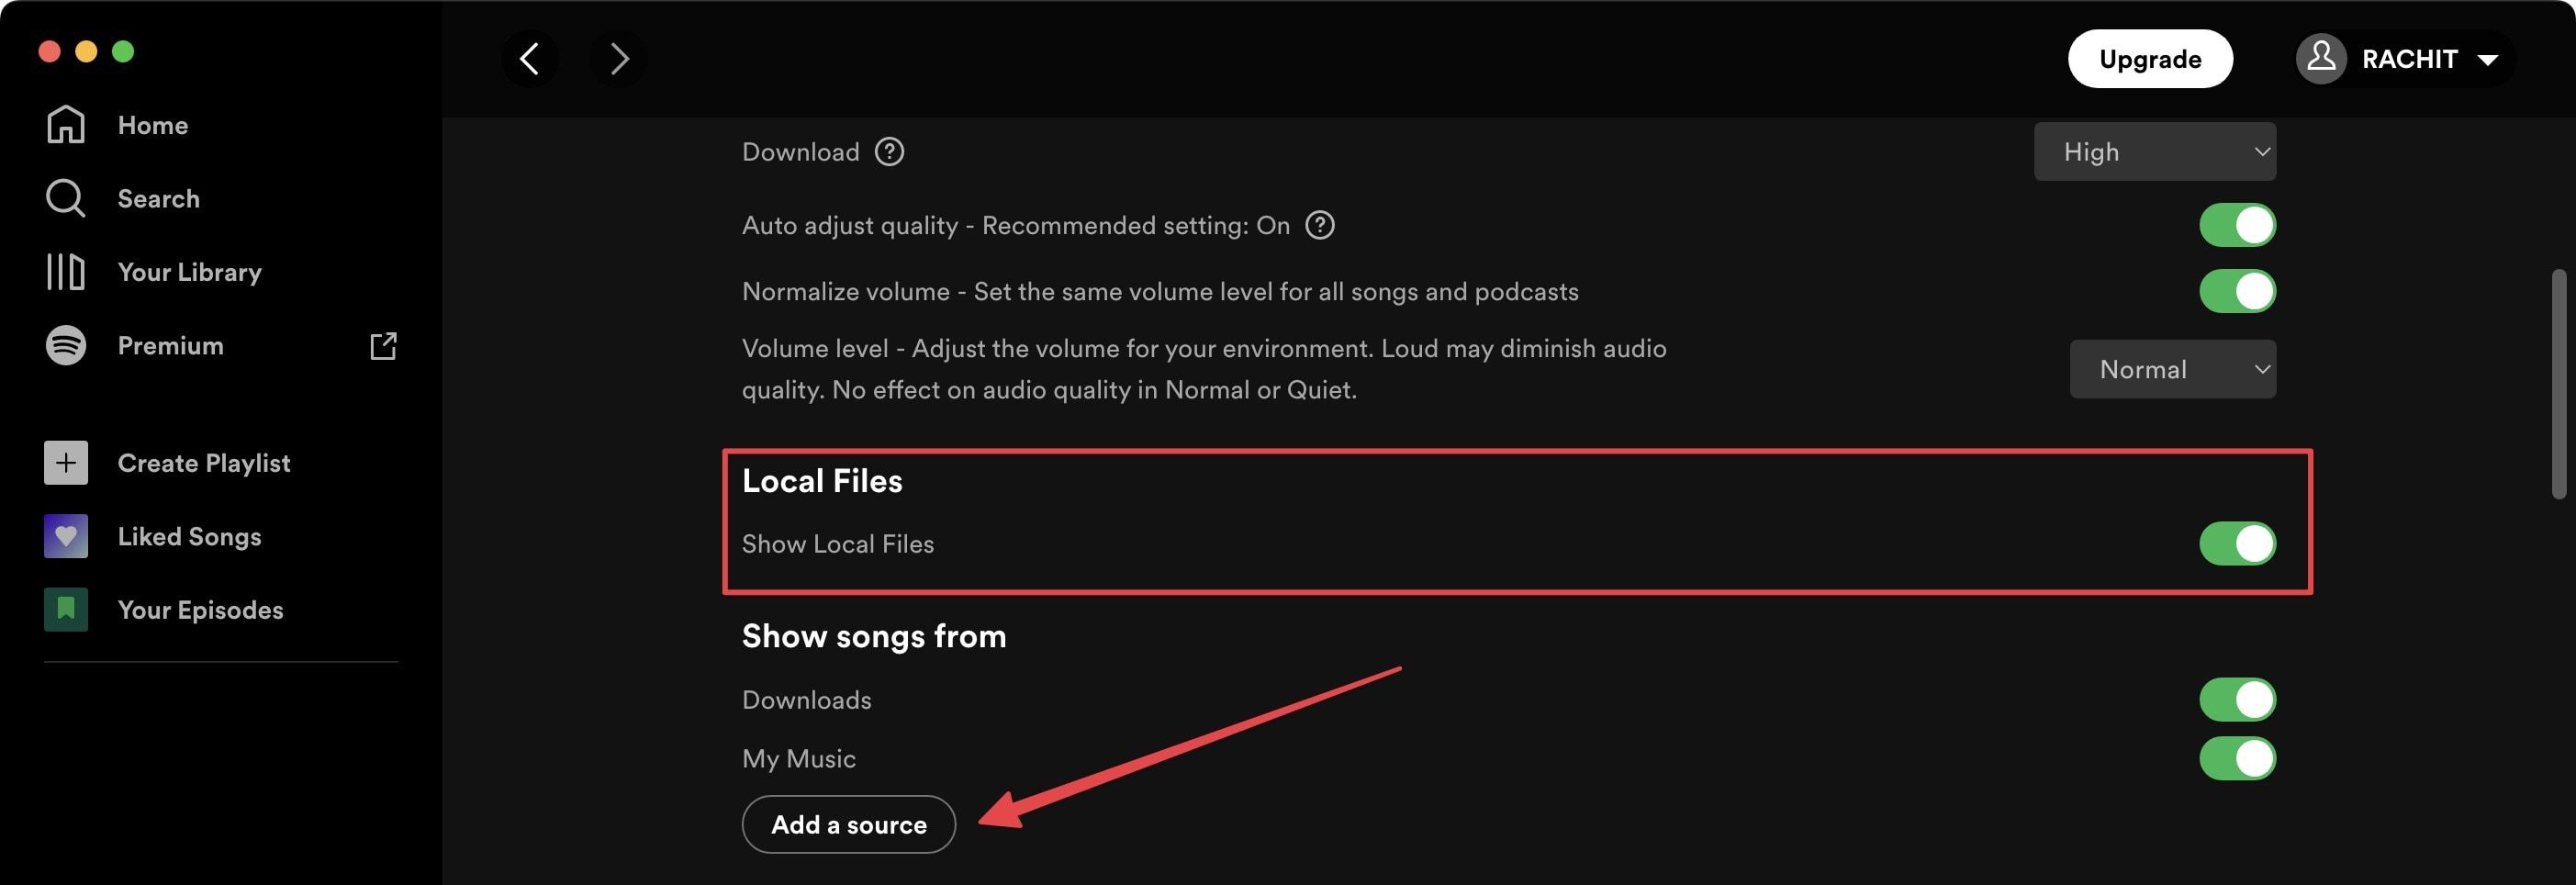 Play local files on Spotify